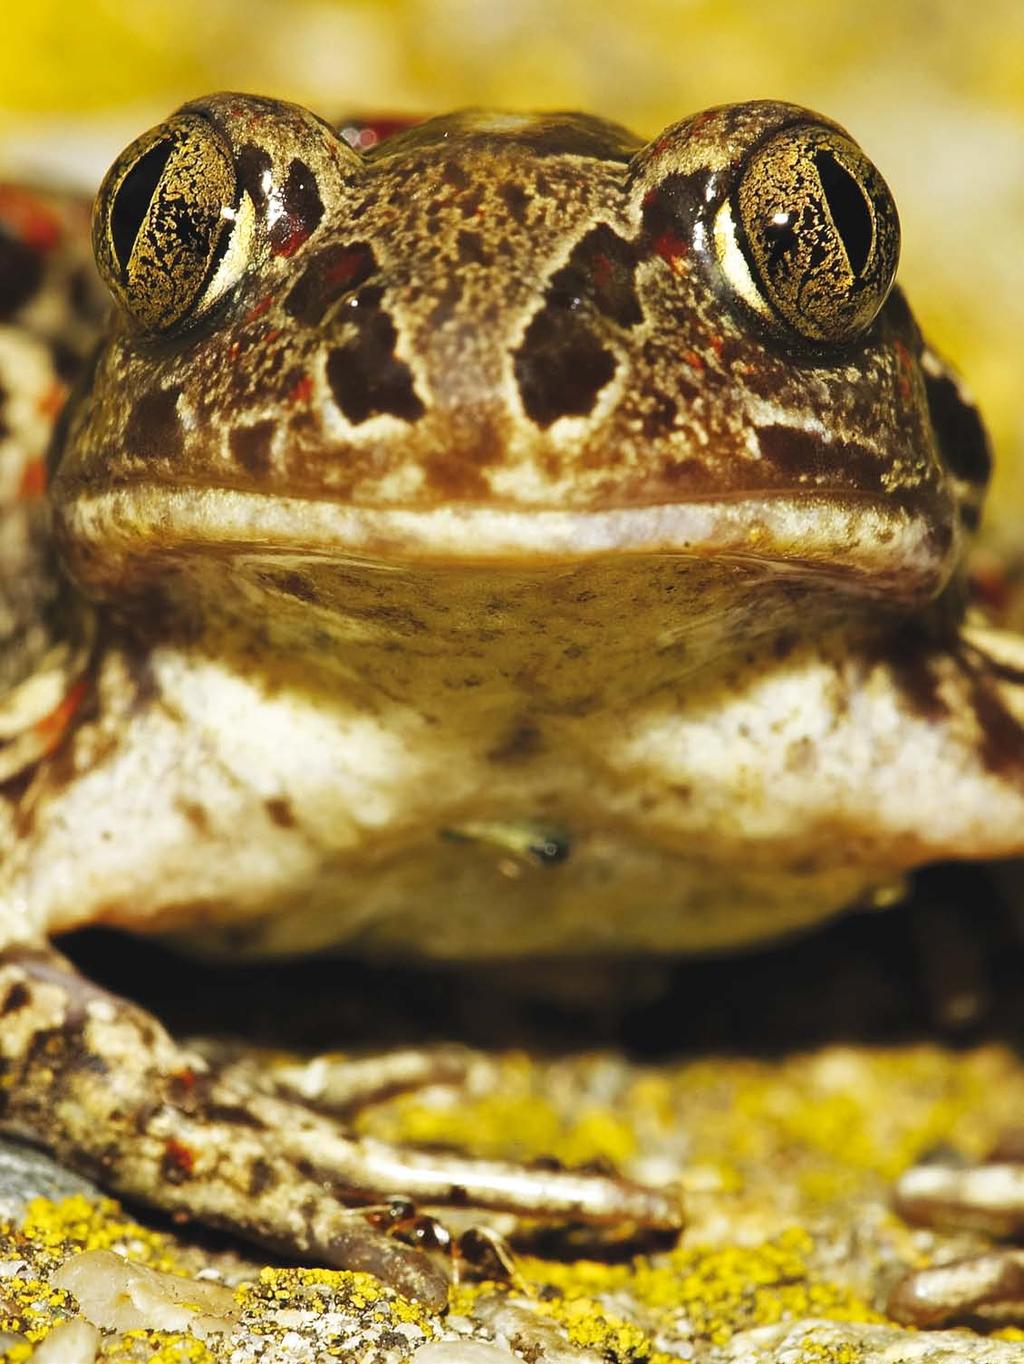 20 The common spadefoot toad